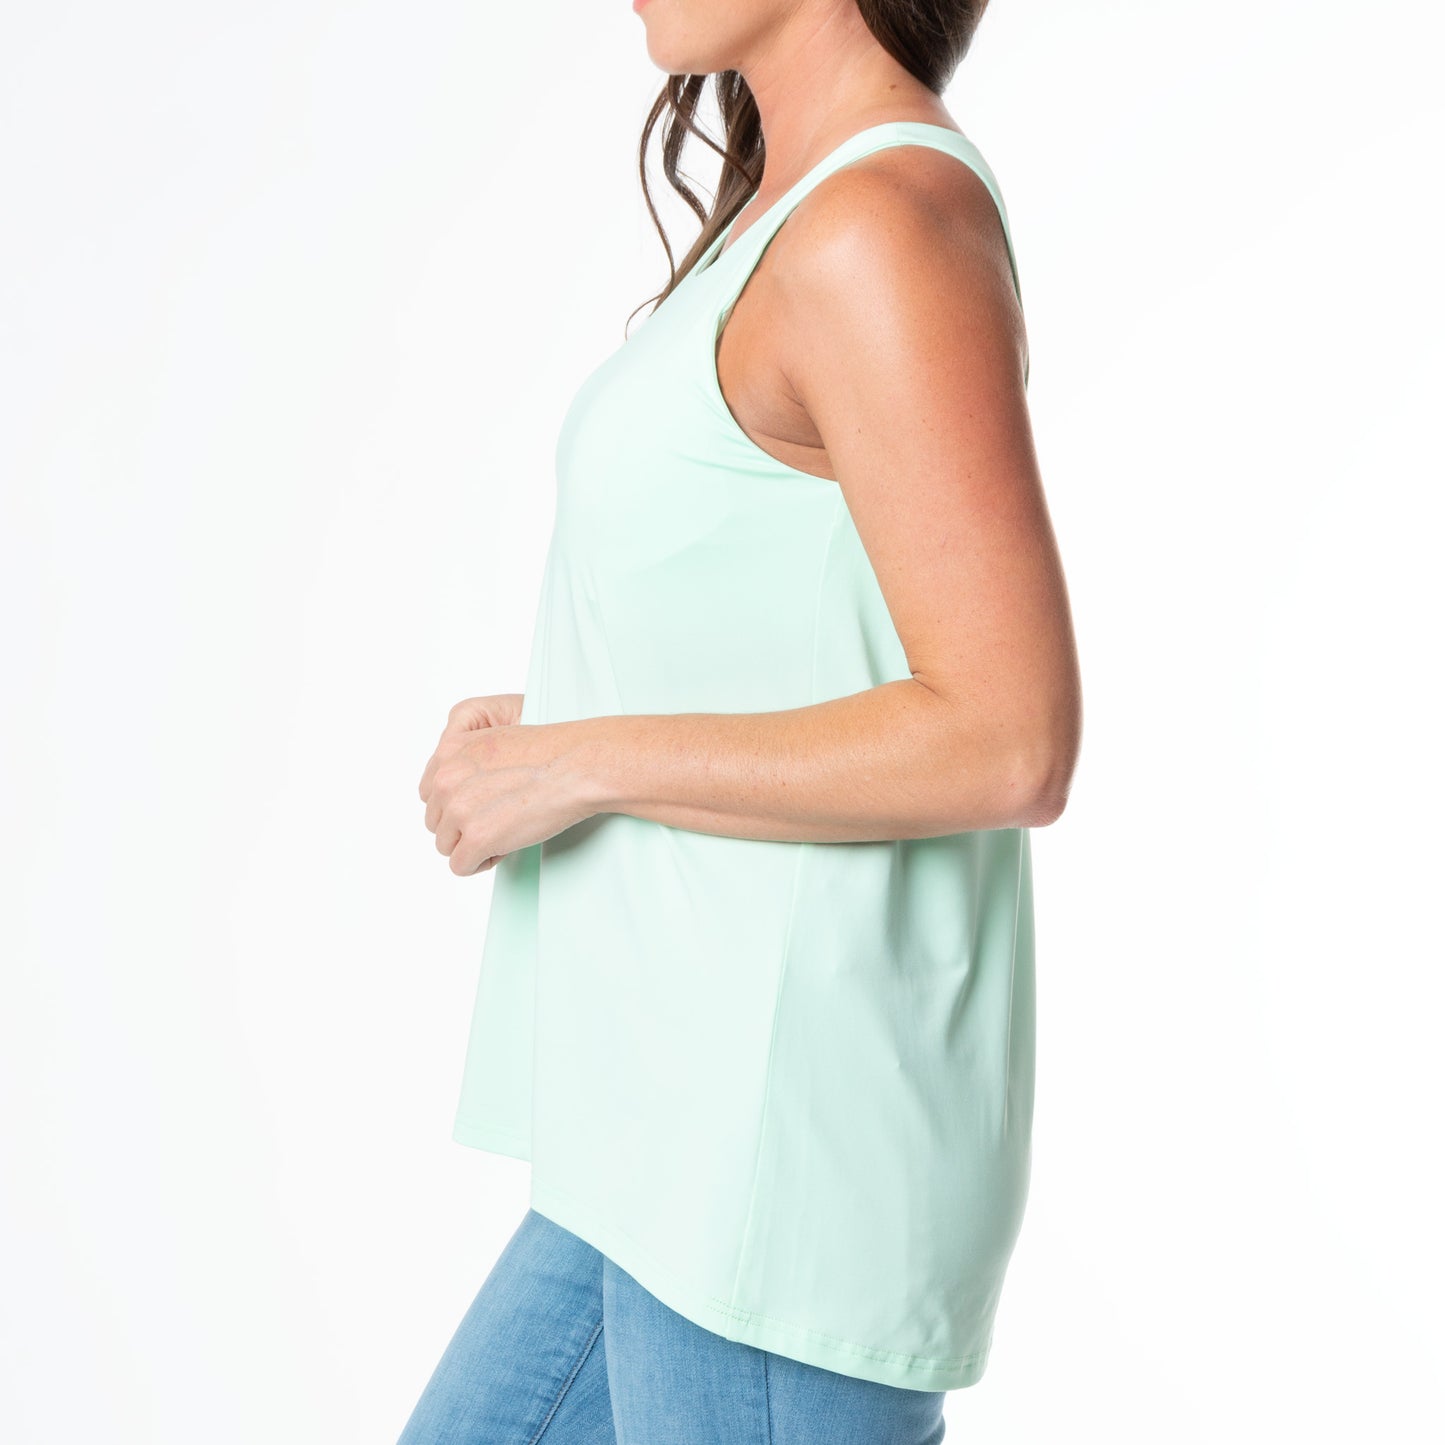 Shay Swing Tank Top with Built-in Bra